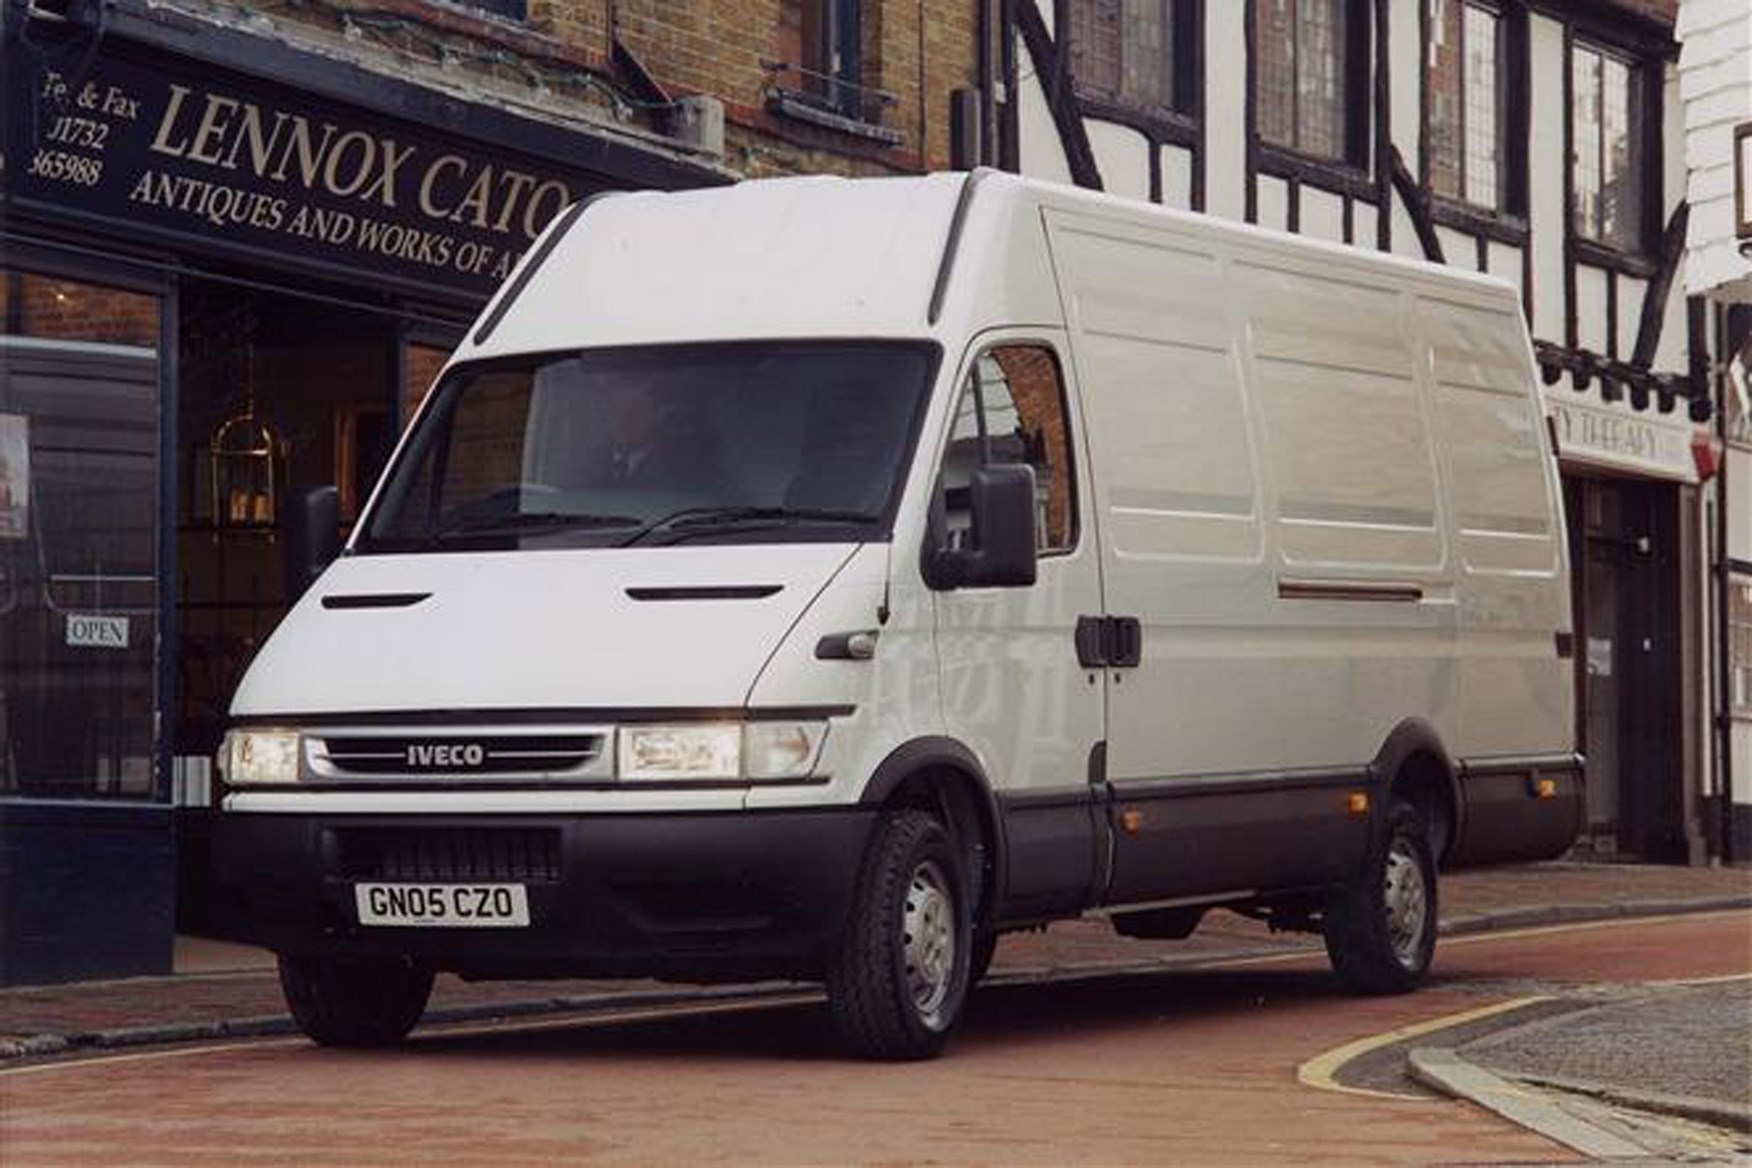 Iveco Van Used For?